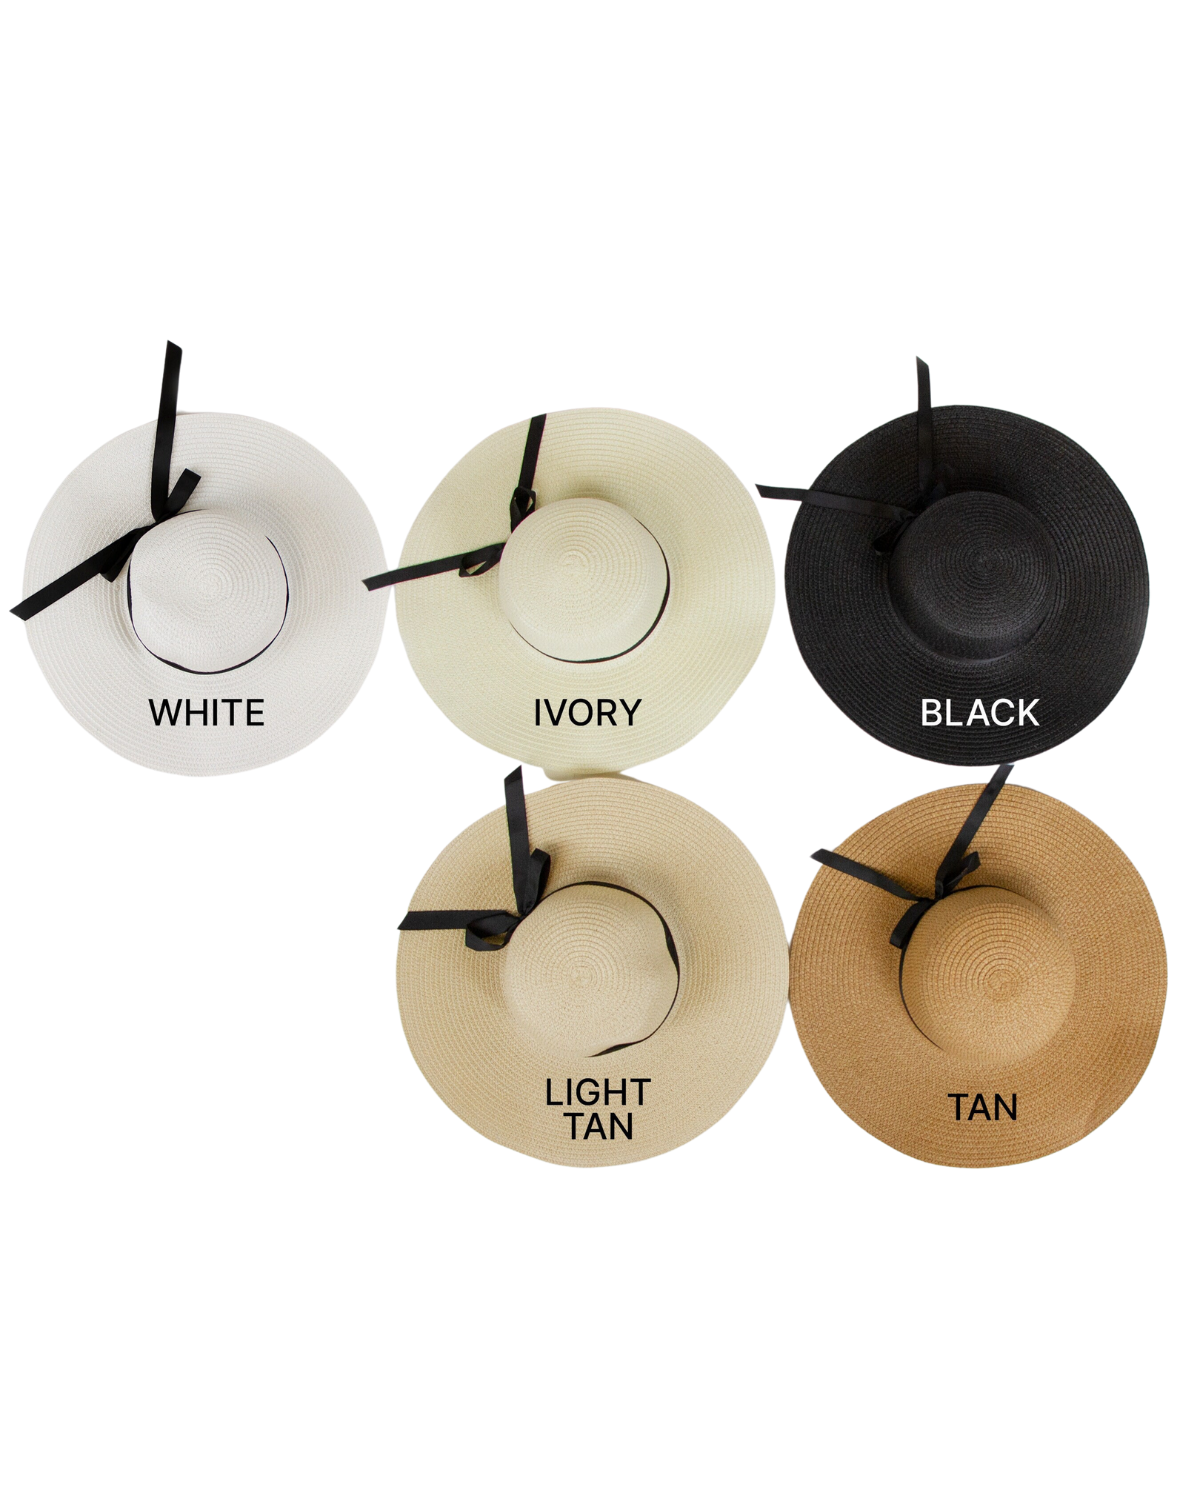 Flat lay on a white background of 5 floppy beach hats with a black ribbon band showing the different color variations from left to right it shows a White, Ivory, Black, Light Tan and Tan.